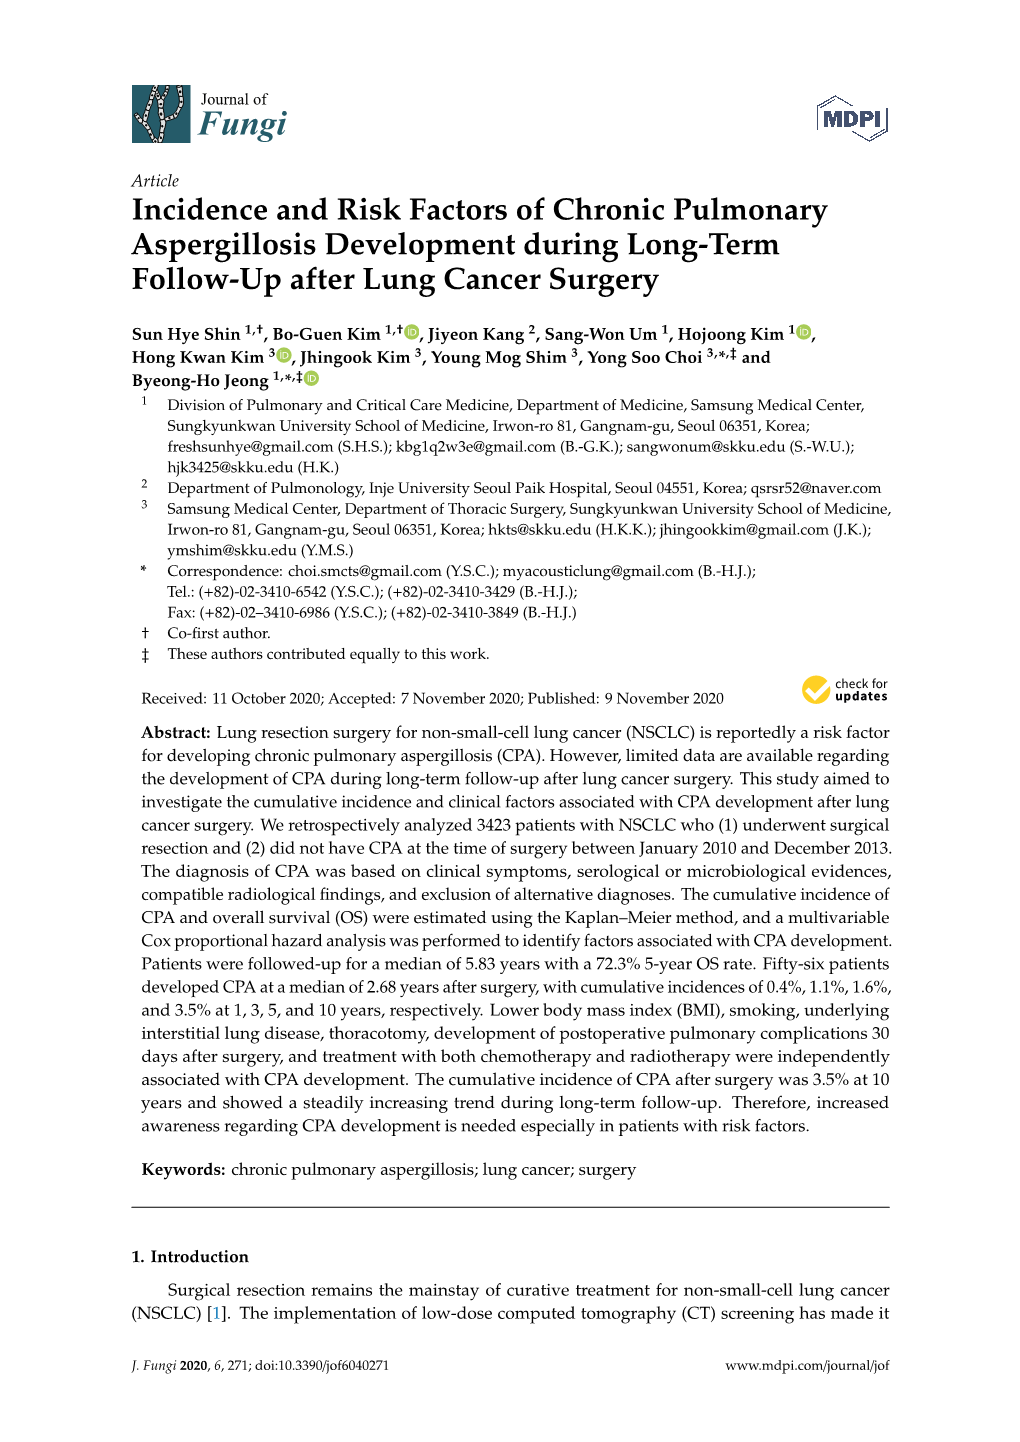 Incidence and Risk Factors of Chronic Pulmonary Aspergillosis Development During Long-Term Follow-Up After Lung Cancer Surgery